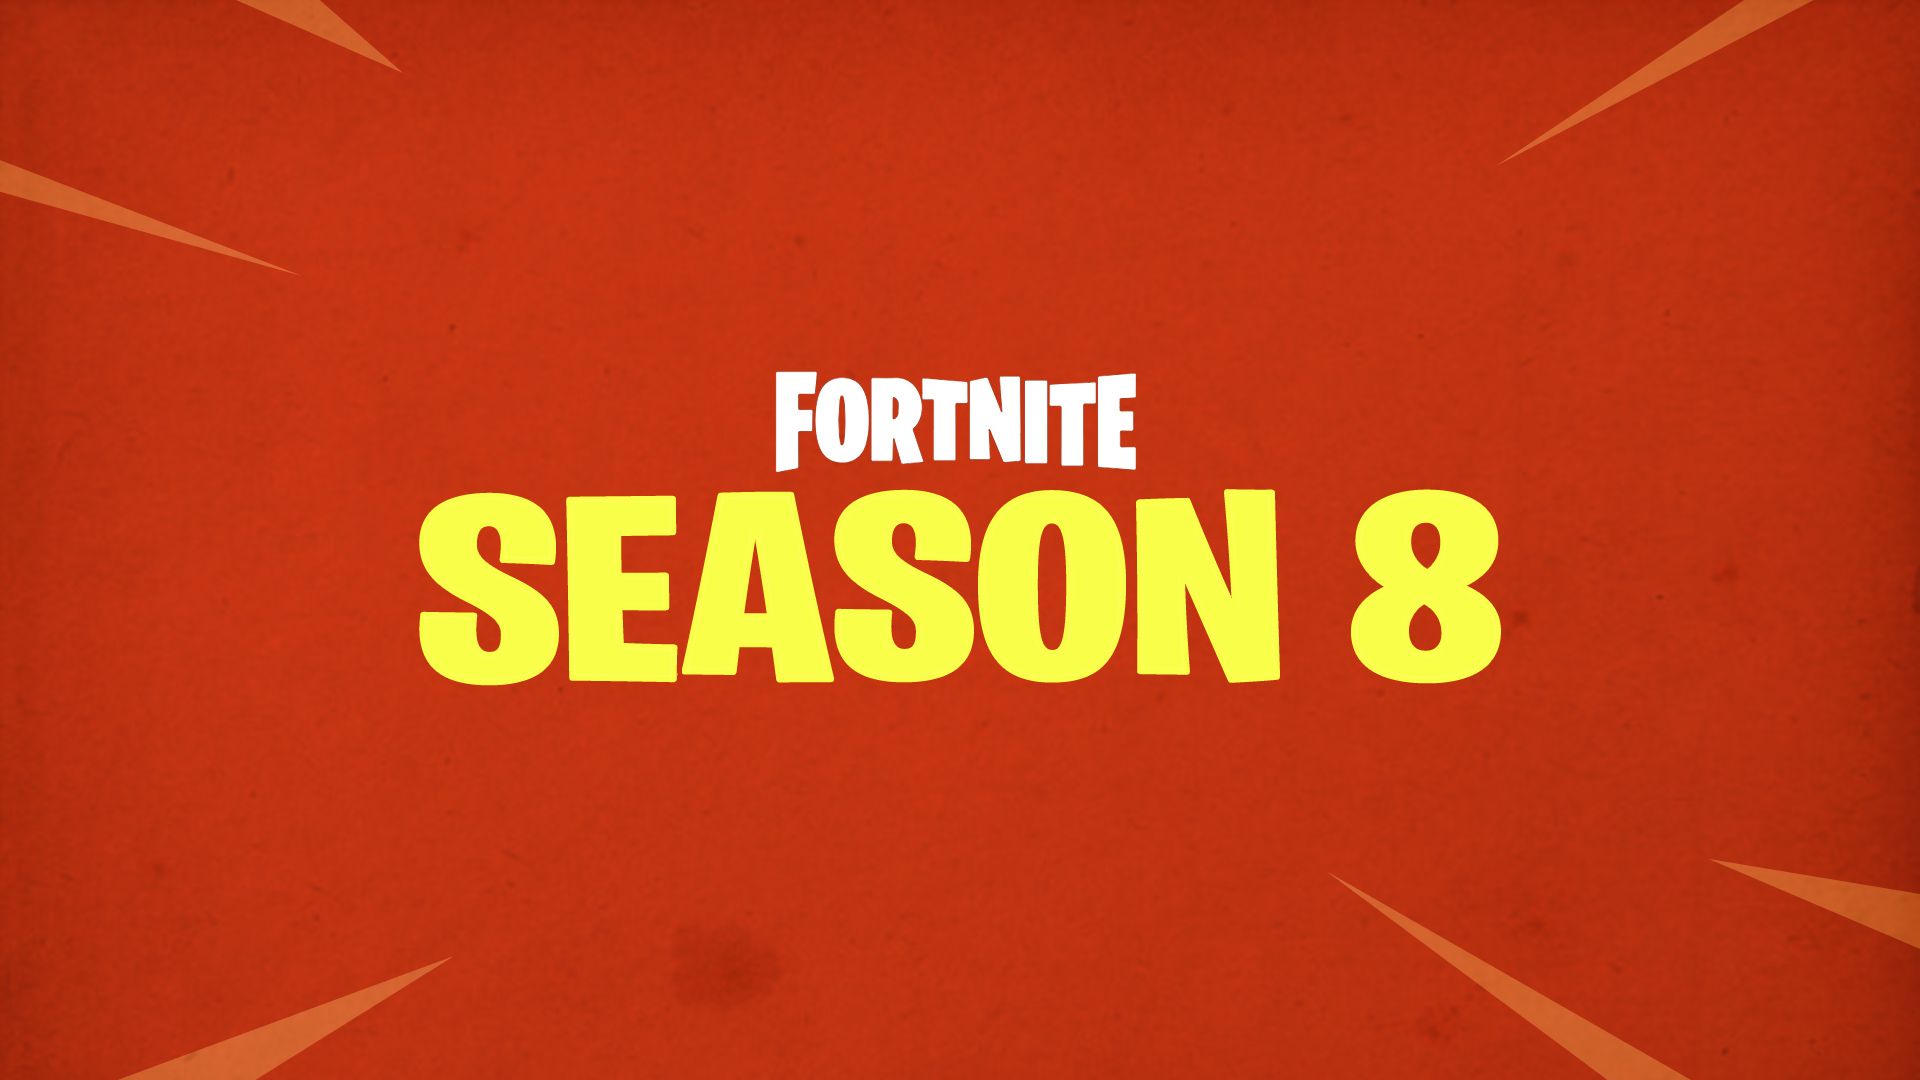 Patch Notes for Fortnite v8.00 - Season 8 Battle Pass, Planes vaulted, and more